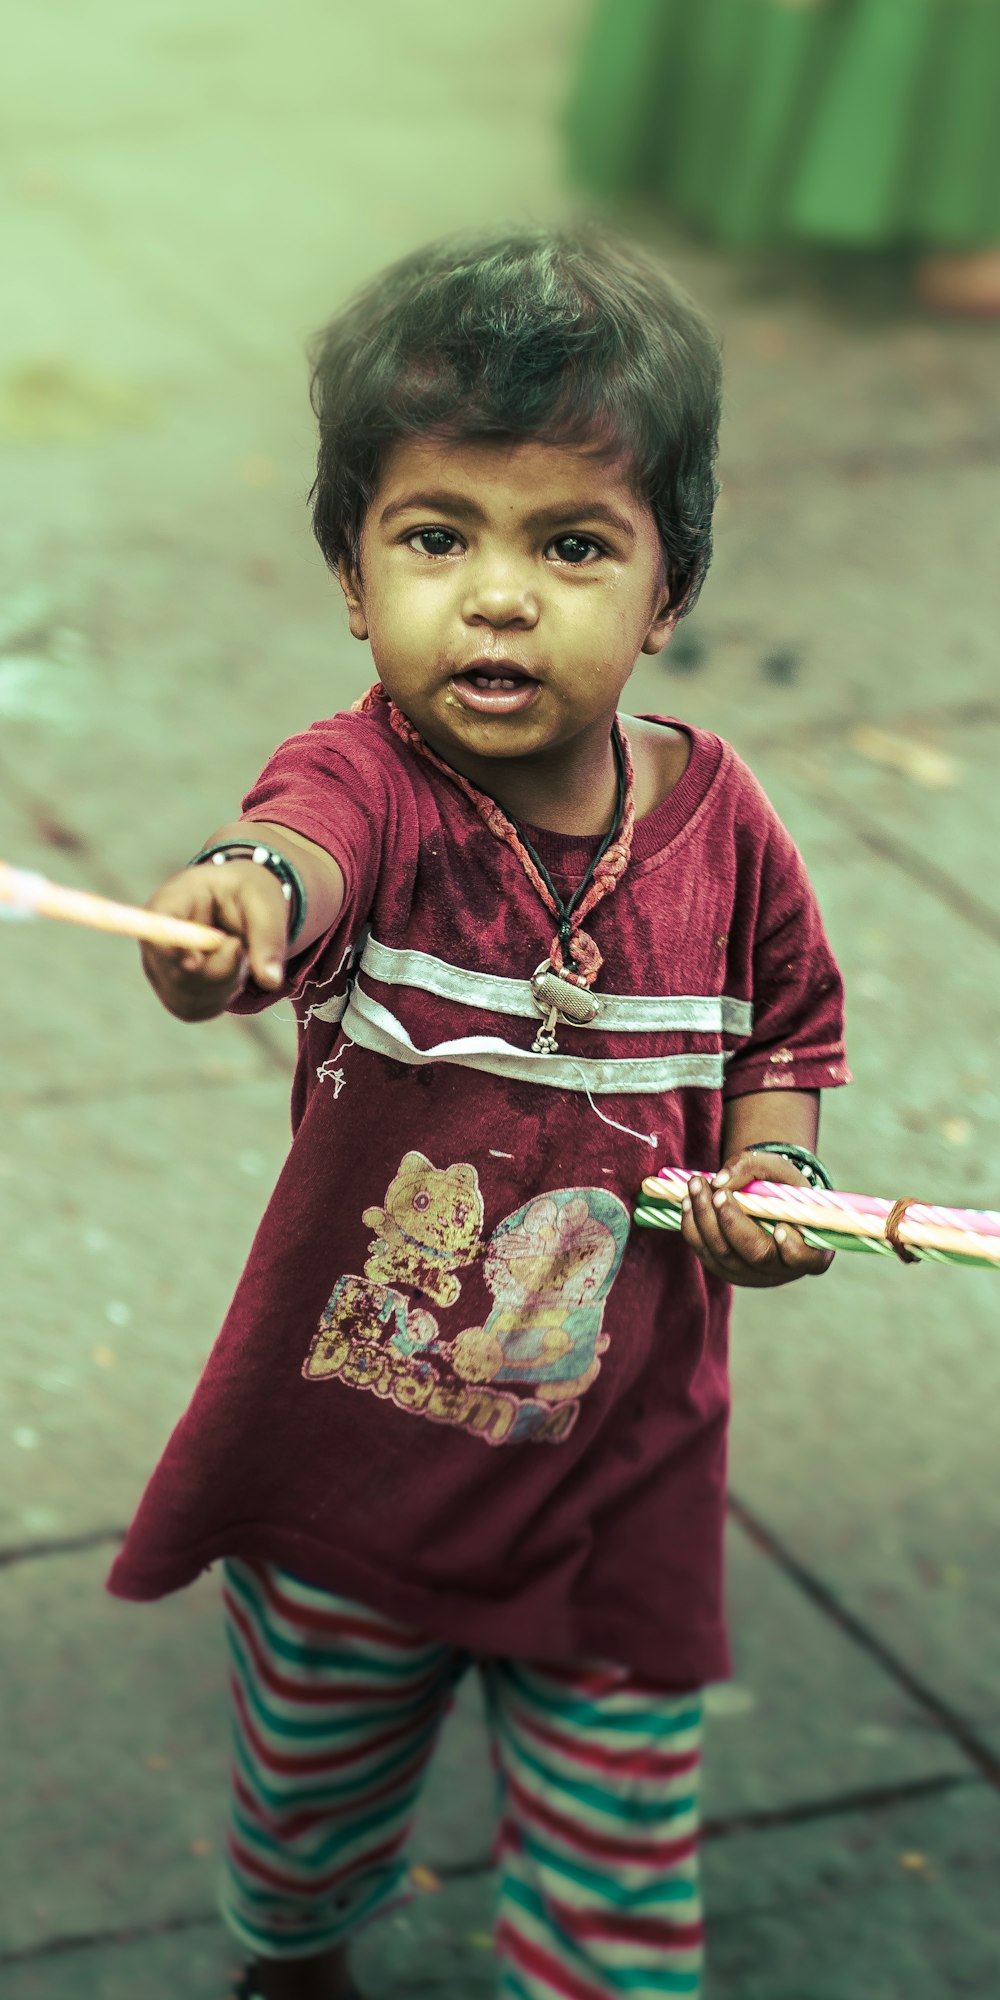 a little boy holding a stick and wearing a red shirt